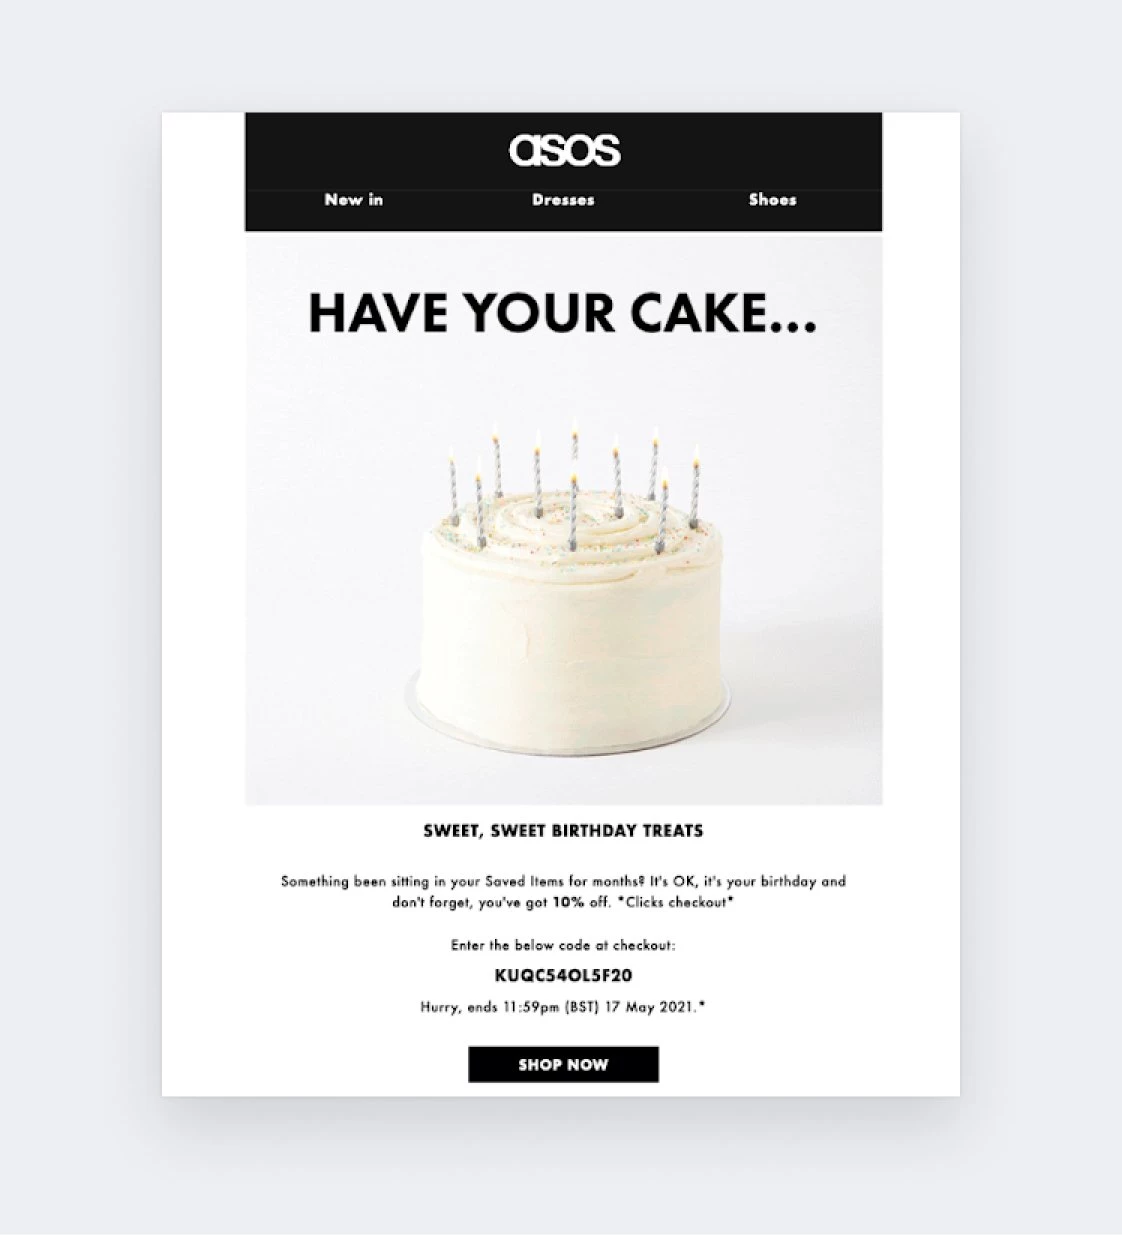 Special offer example - asos have your cake - unique coupon code